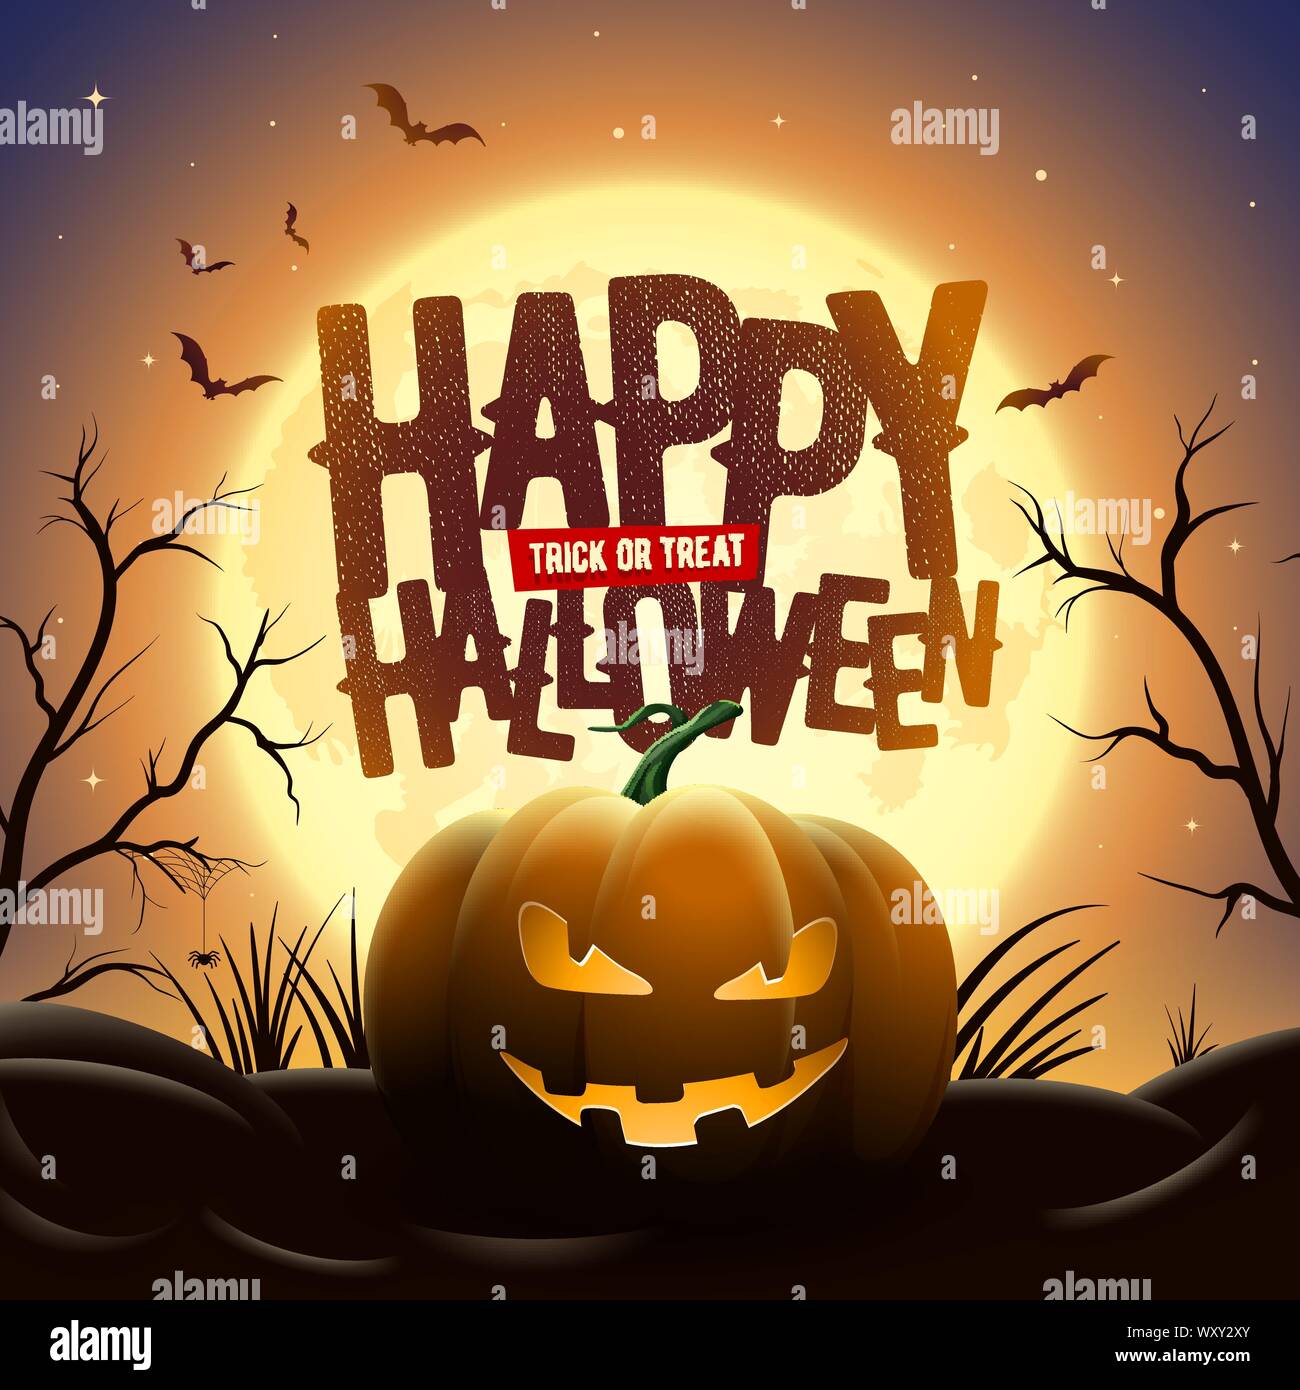 Creepy Halloween midnight illustration. Pumpkins under full moon. Bats are flying. Elements are layered separately in vector file. Stock Vector